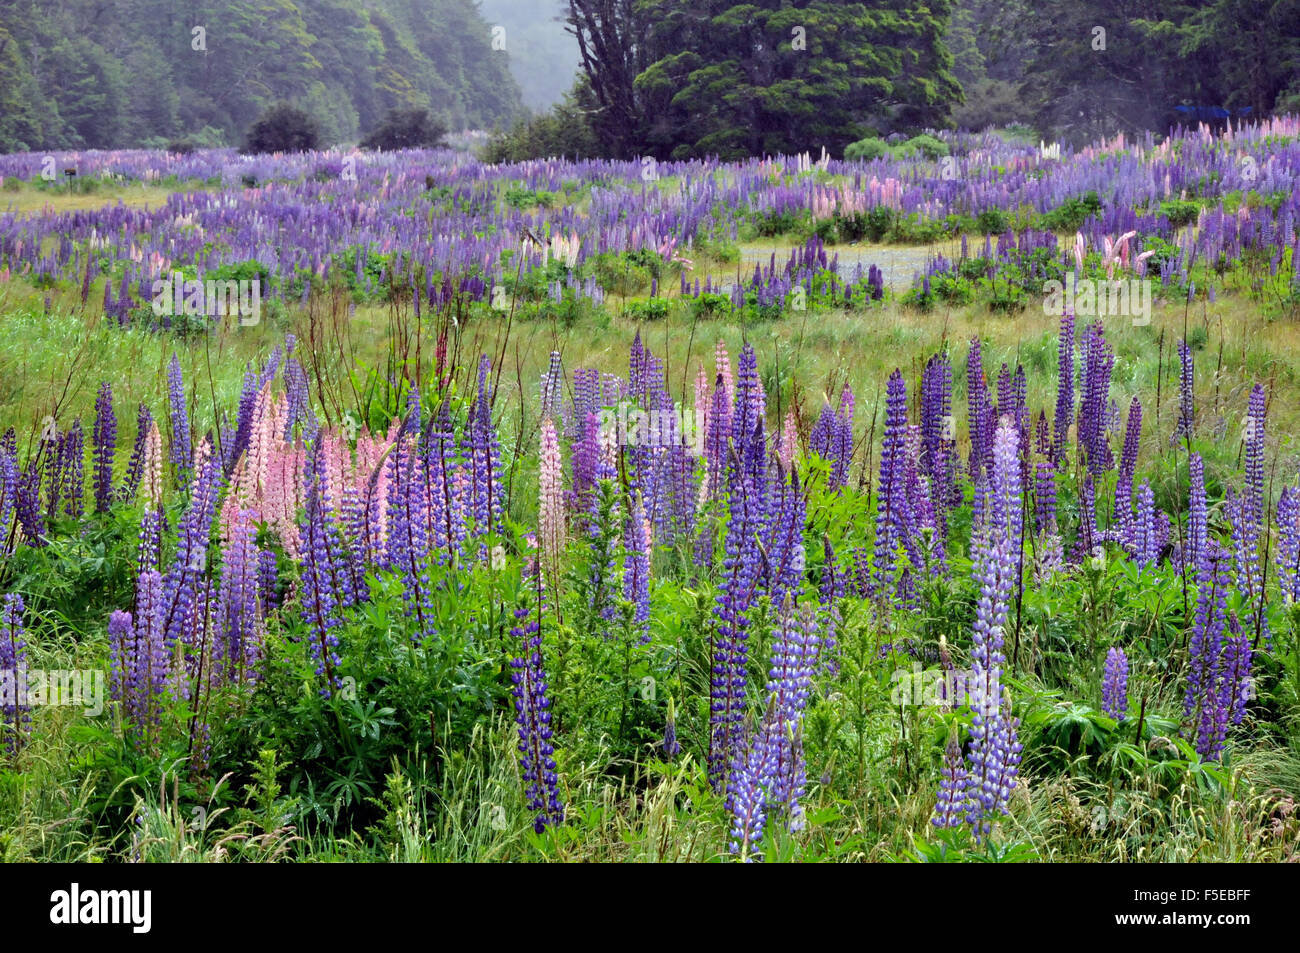 Flowering lupines, Lupinus polyphyllus, along Milford road, Te Anau, Fiordland National Park, South Island, New Zealand Stock Photo